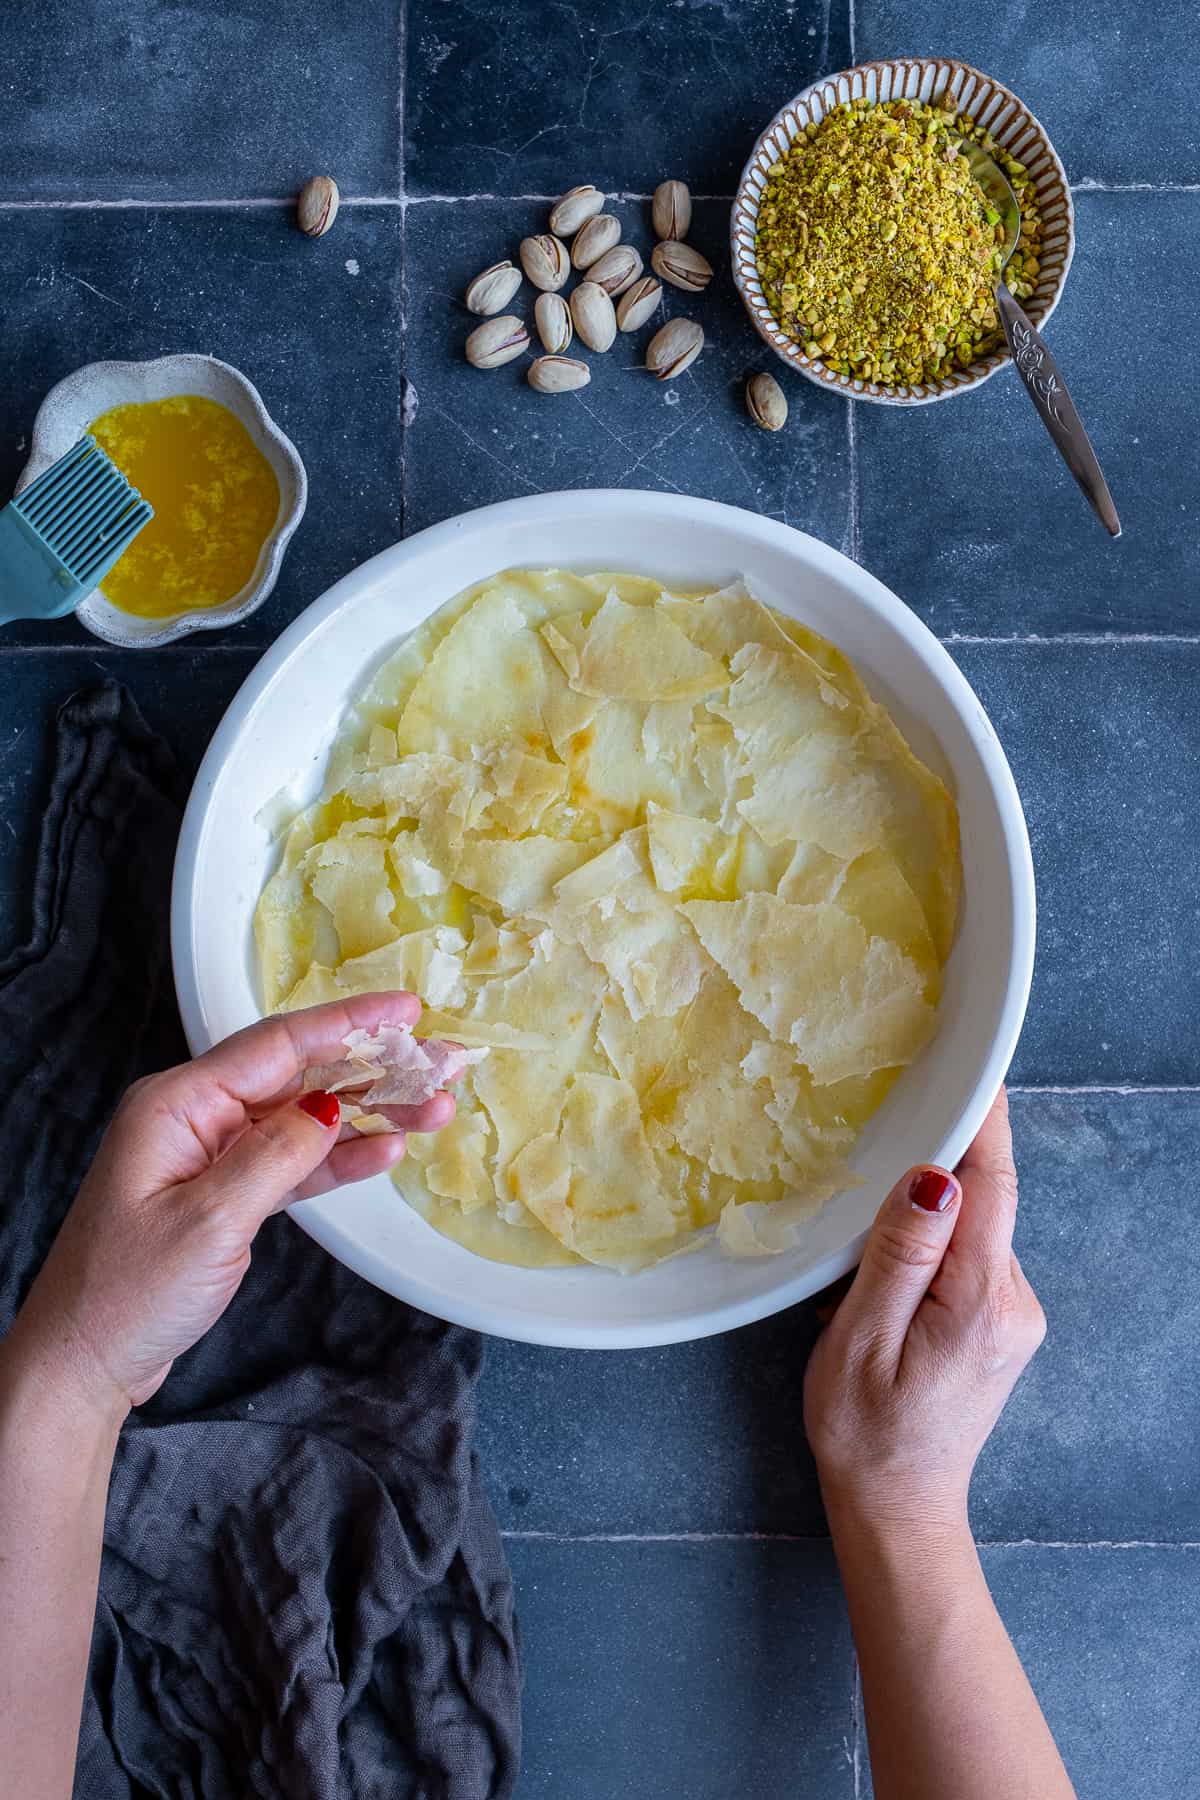 Hands placing torn phyllo sheets in a round baking pan, melted butter and a brush, pistachios and chopped pistachios on the side.